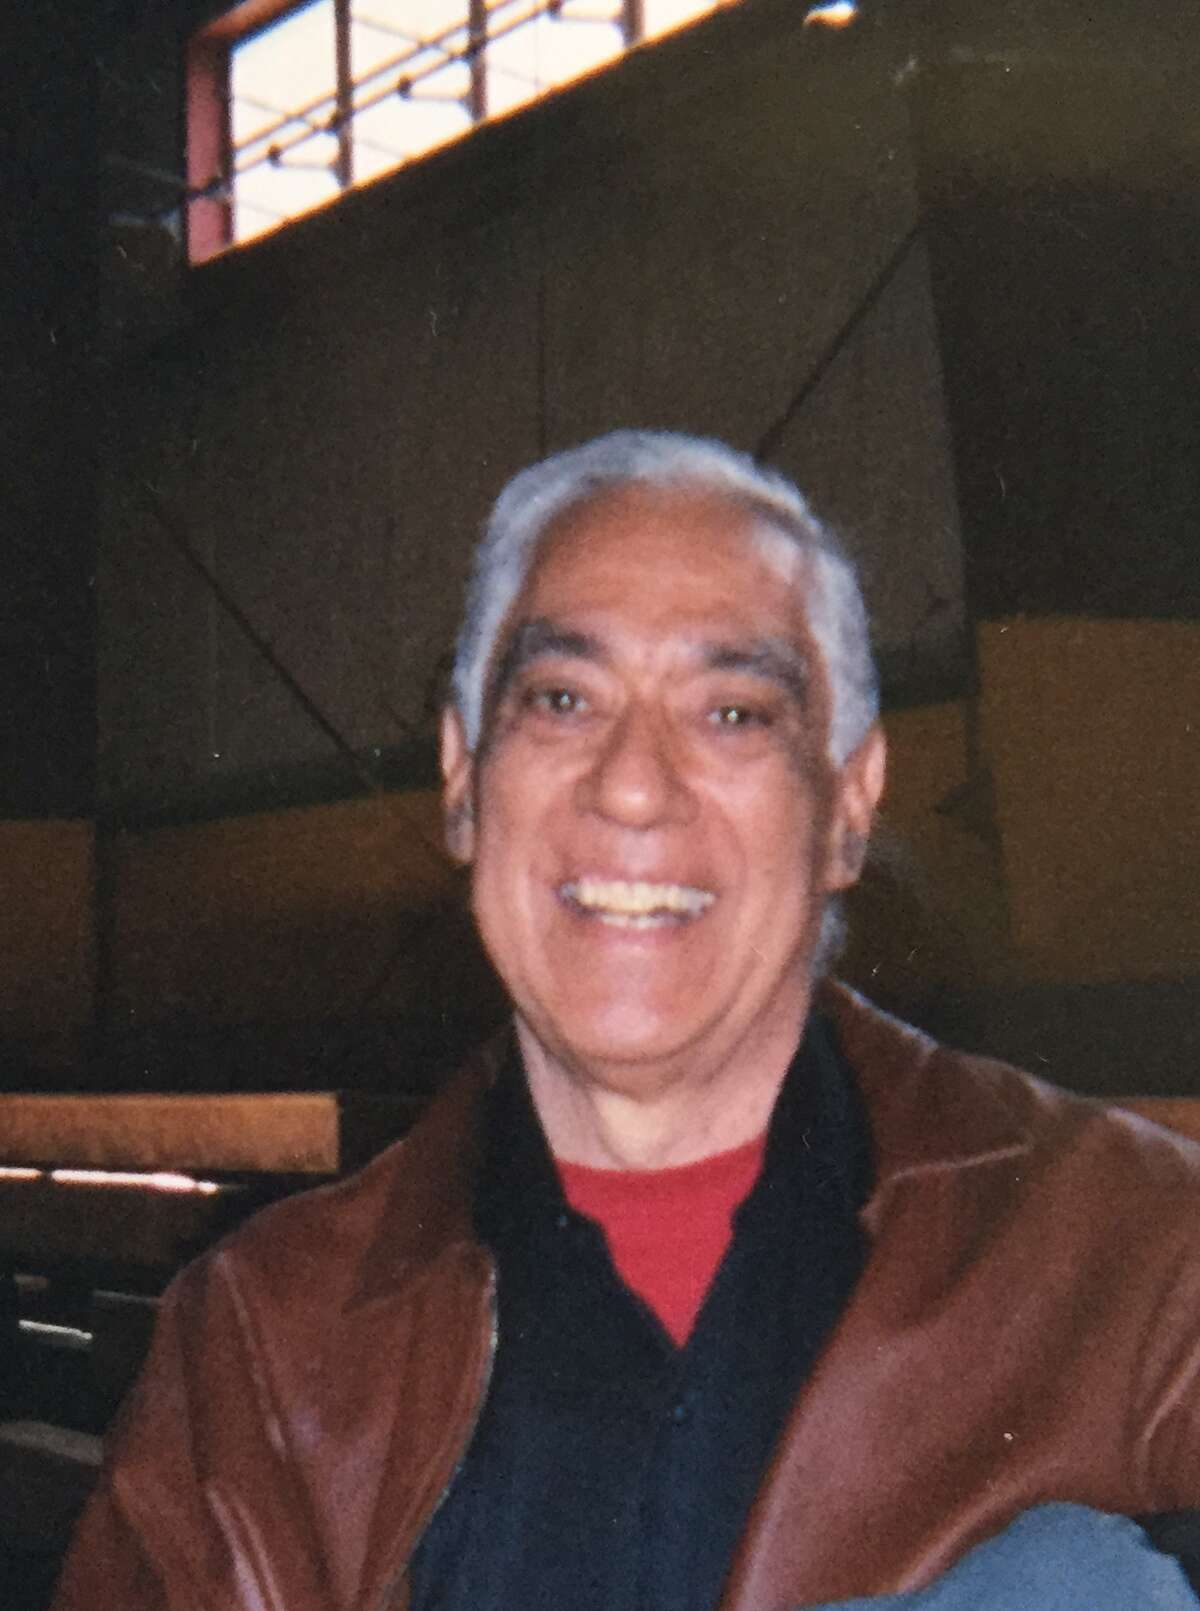 After serving as the executive director of the San Antonio Neighborhood Youth Organization for 23 years, Julian F. Rodriguez died Jan. 27 at the age of 75.More: Rodriguez helped San Antonio youths